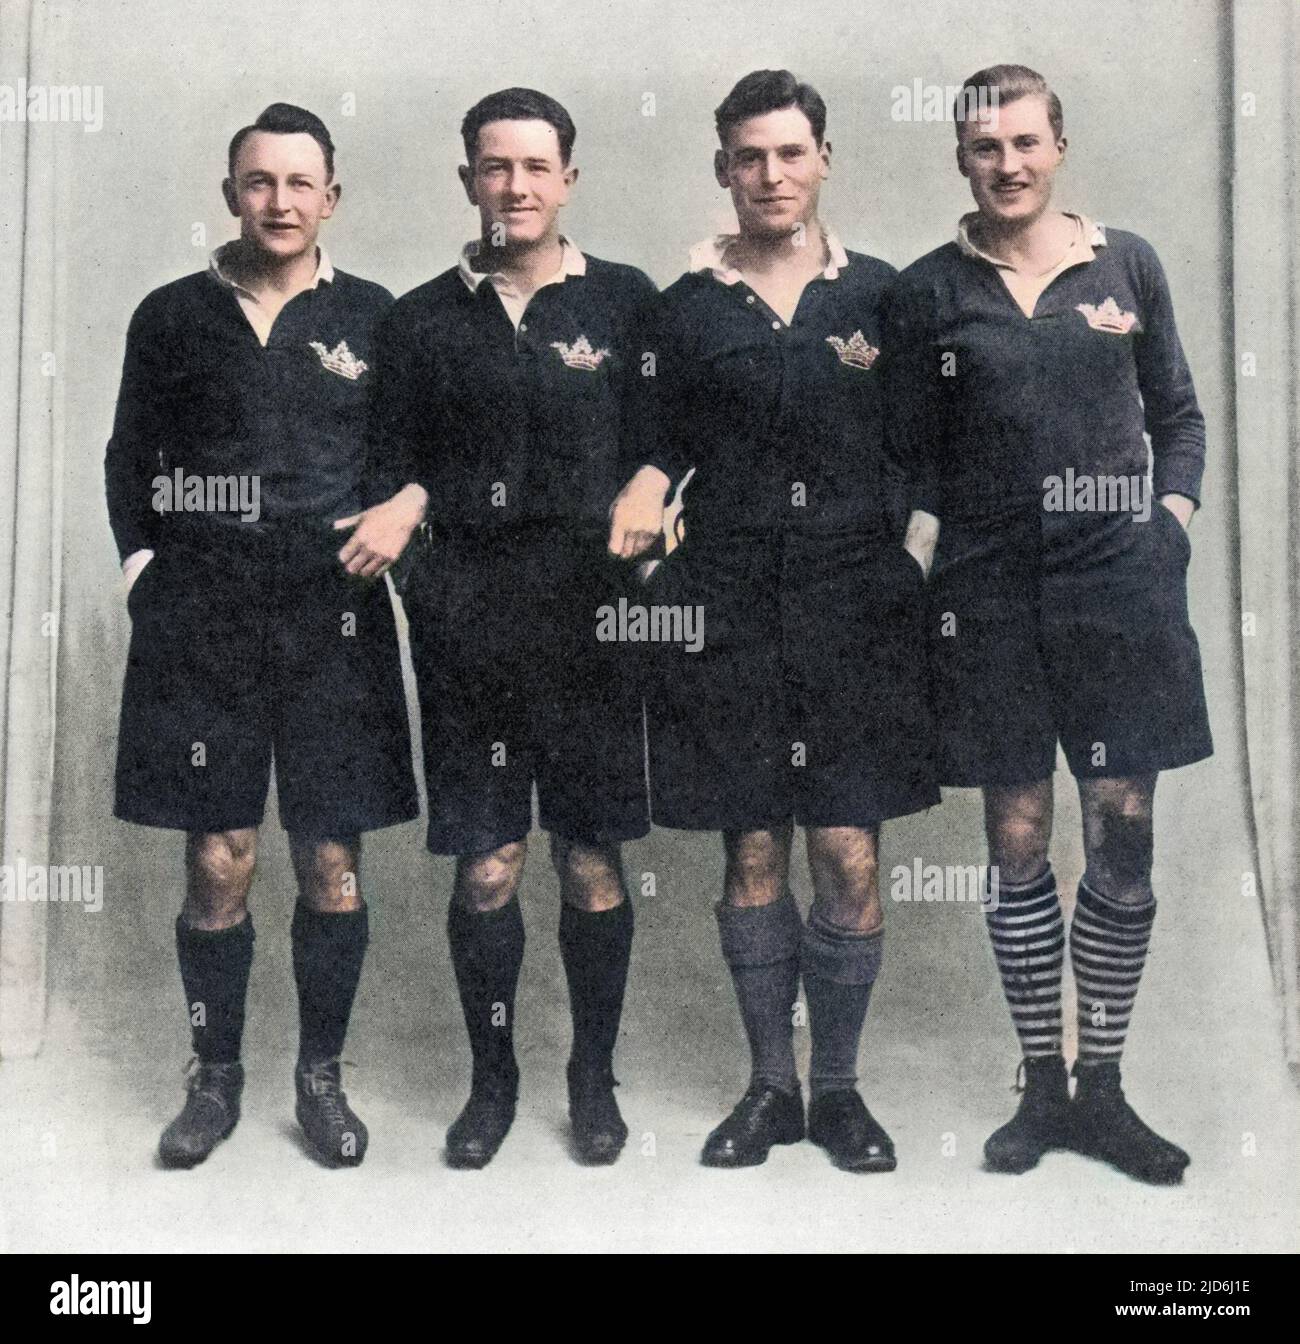 The Oxford University 'Scoring Machine': The Scottish rugby union three-quarter line, made up entirely of players from Oxford University, which contributed towards a Scottish grand slam in the Five Nations tournament of 1925. From left to right, A.C.Wallace, G.G.Aitken, G.P.S.Macpherson and I.S.Smith. Macpherson was unable to play in the fixture against Ireland in Dublin, due to an injury, and his place was taken by J.C.Dykes Colourised version of: 10409929       Date: 1925 Stock Photo